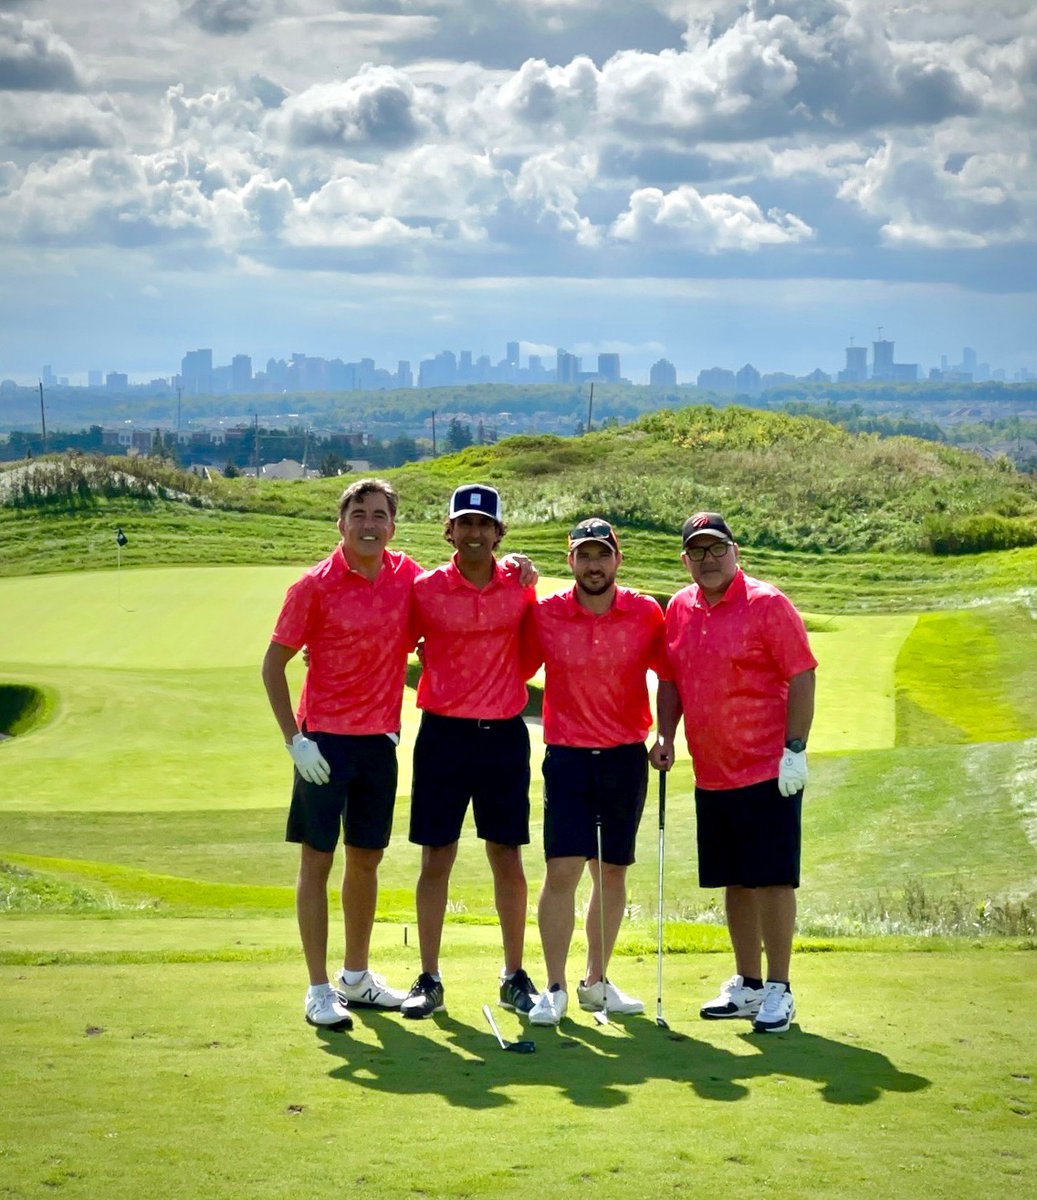 Had a great time representing @UTOSM at the annual University of Toronto Orthopaedic Golf Tournament w/  Whelan, Hoit, and Theo! @Toronto_Ortho @UofTSurgery @GraemeHoit @j_s_theo